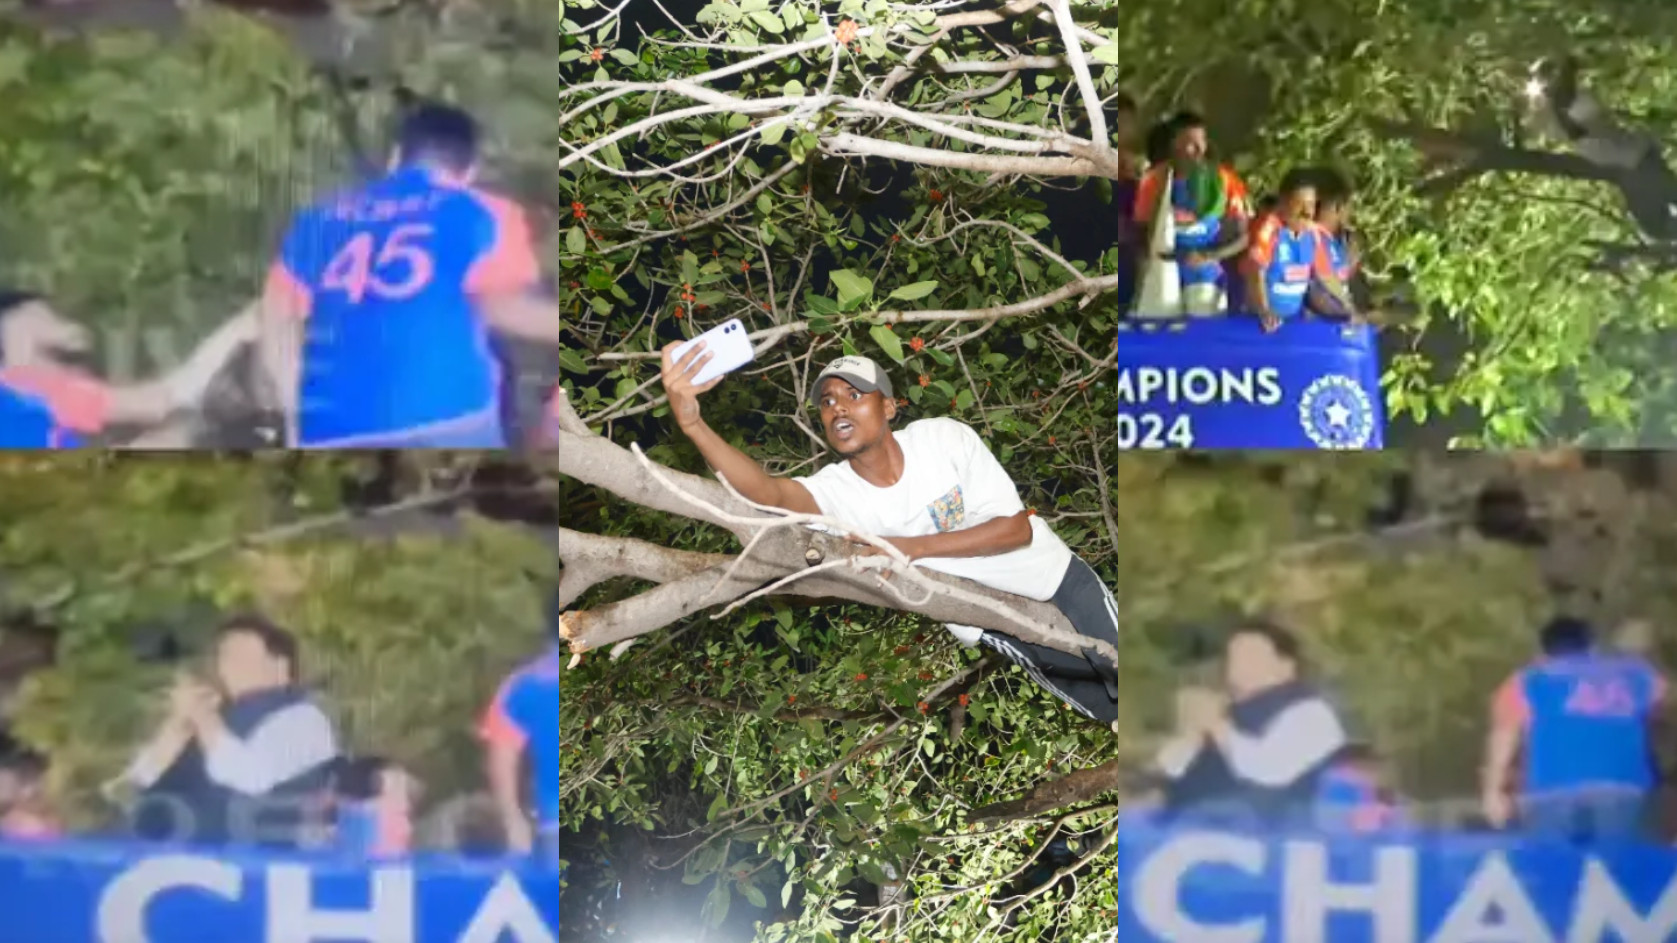 WATCH- Virat Kohli tells Rohit Sharma about fan perched on tree to click photos; Rohit asks fan to climb down